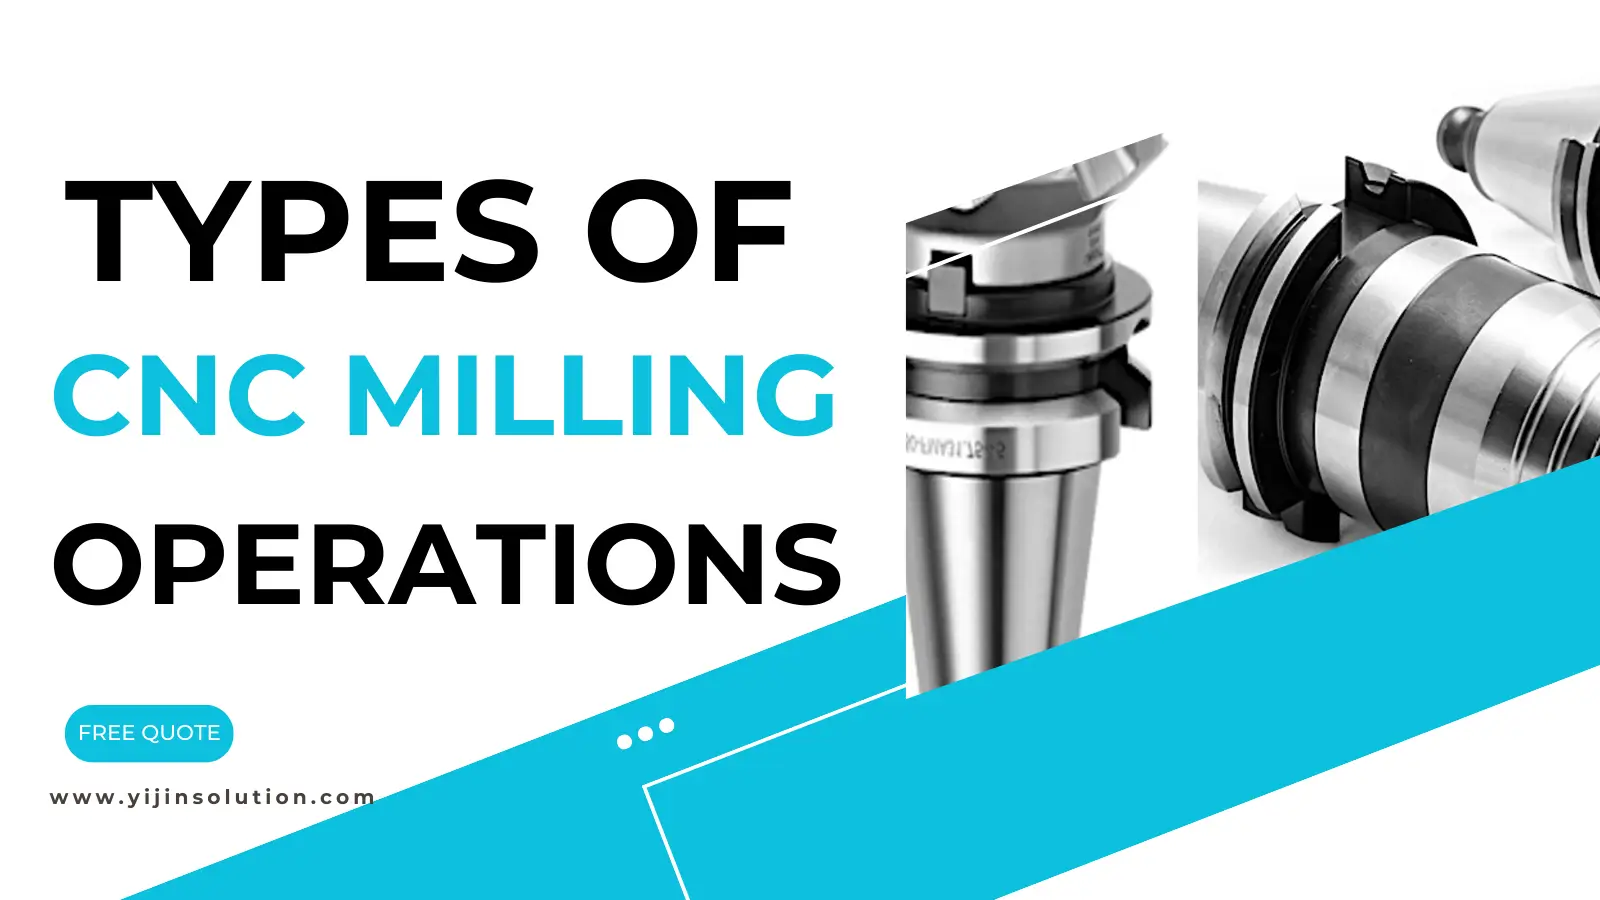 Types of CNC Milling Operations